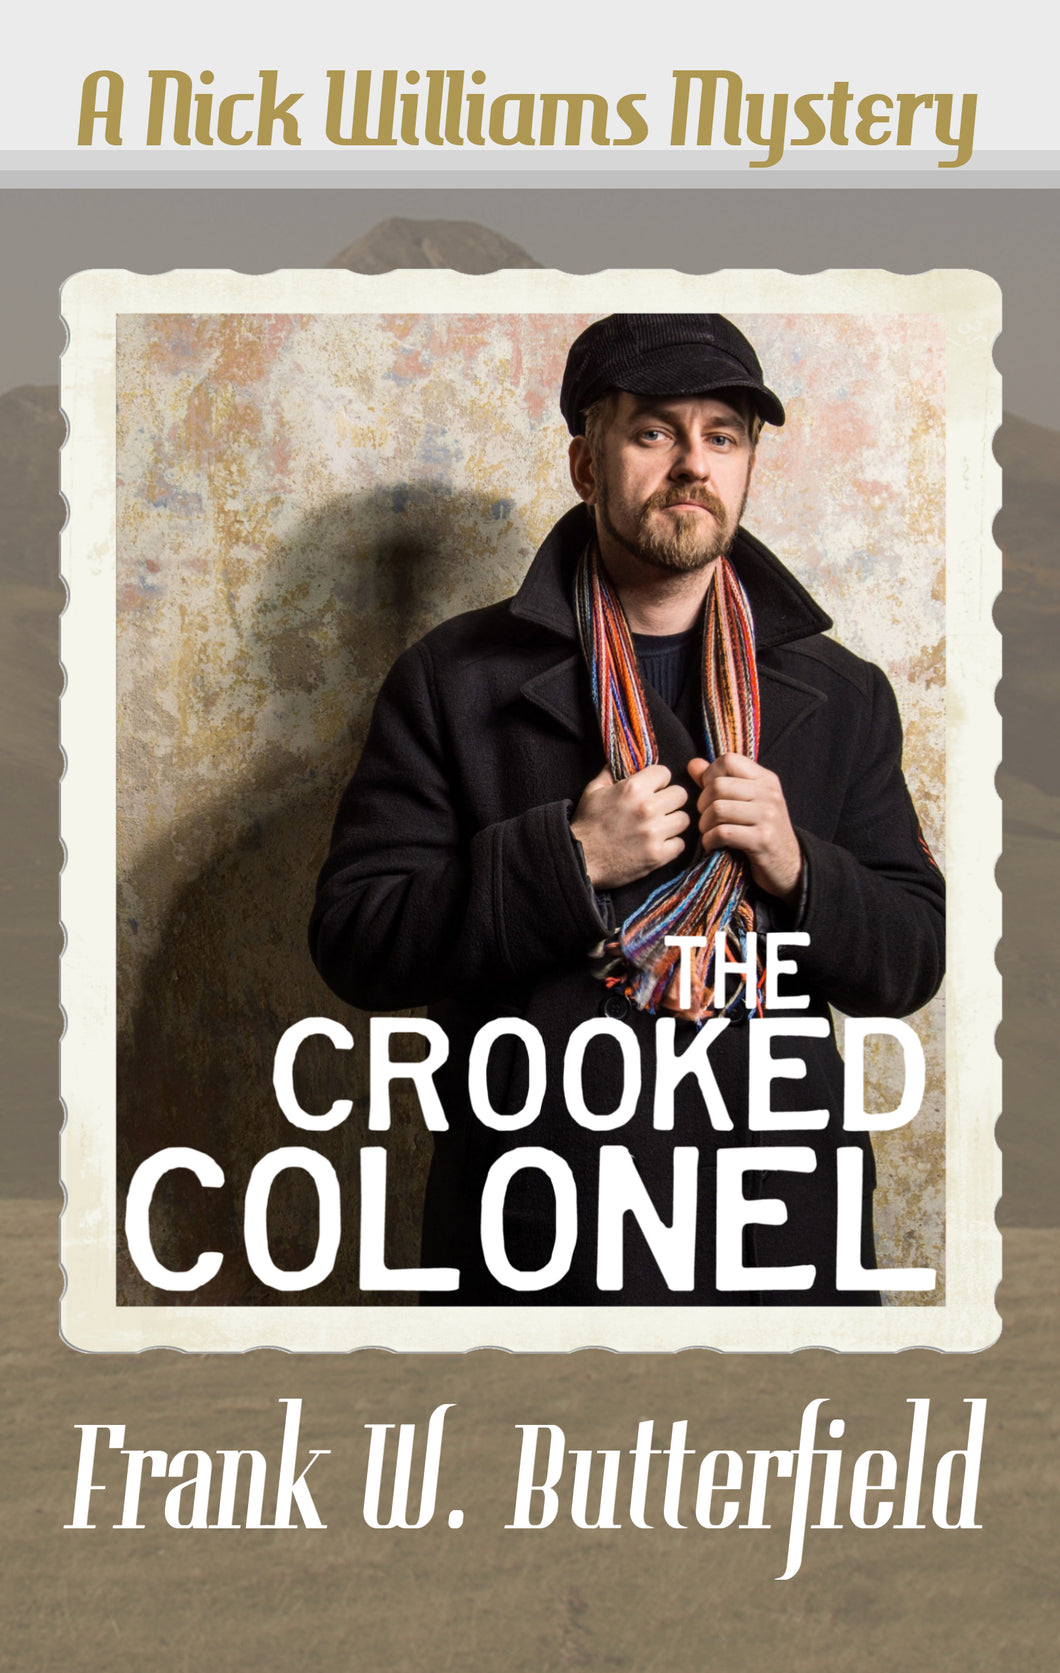 The Crooked Colonel